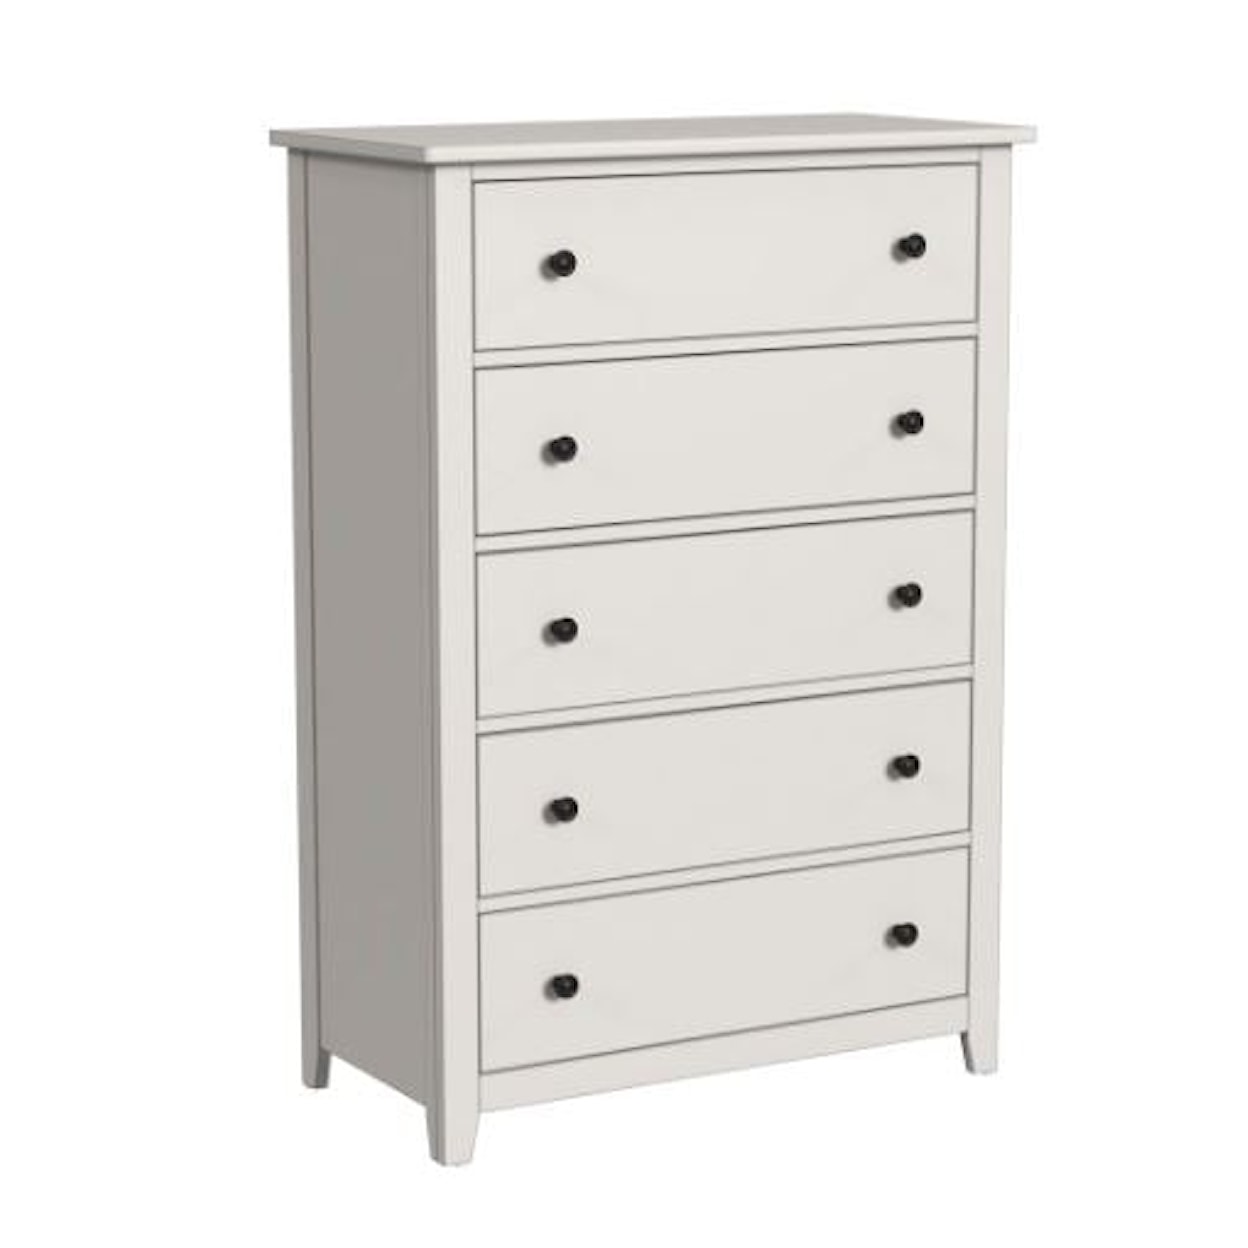 Westwood Design Lodge Cases 5-Drawer Chest